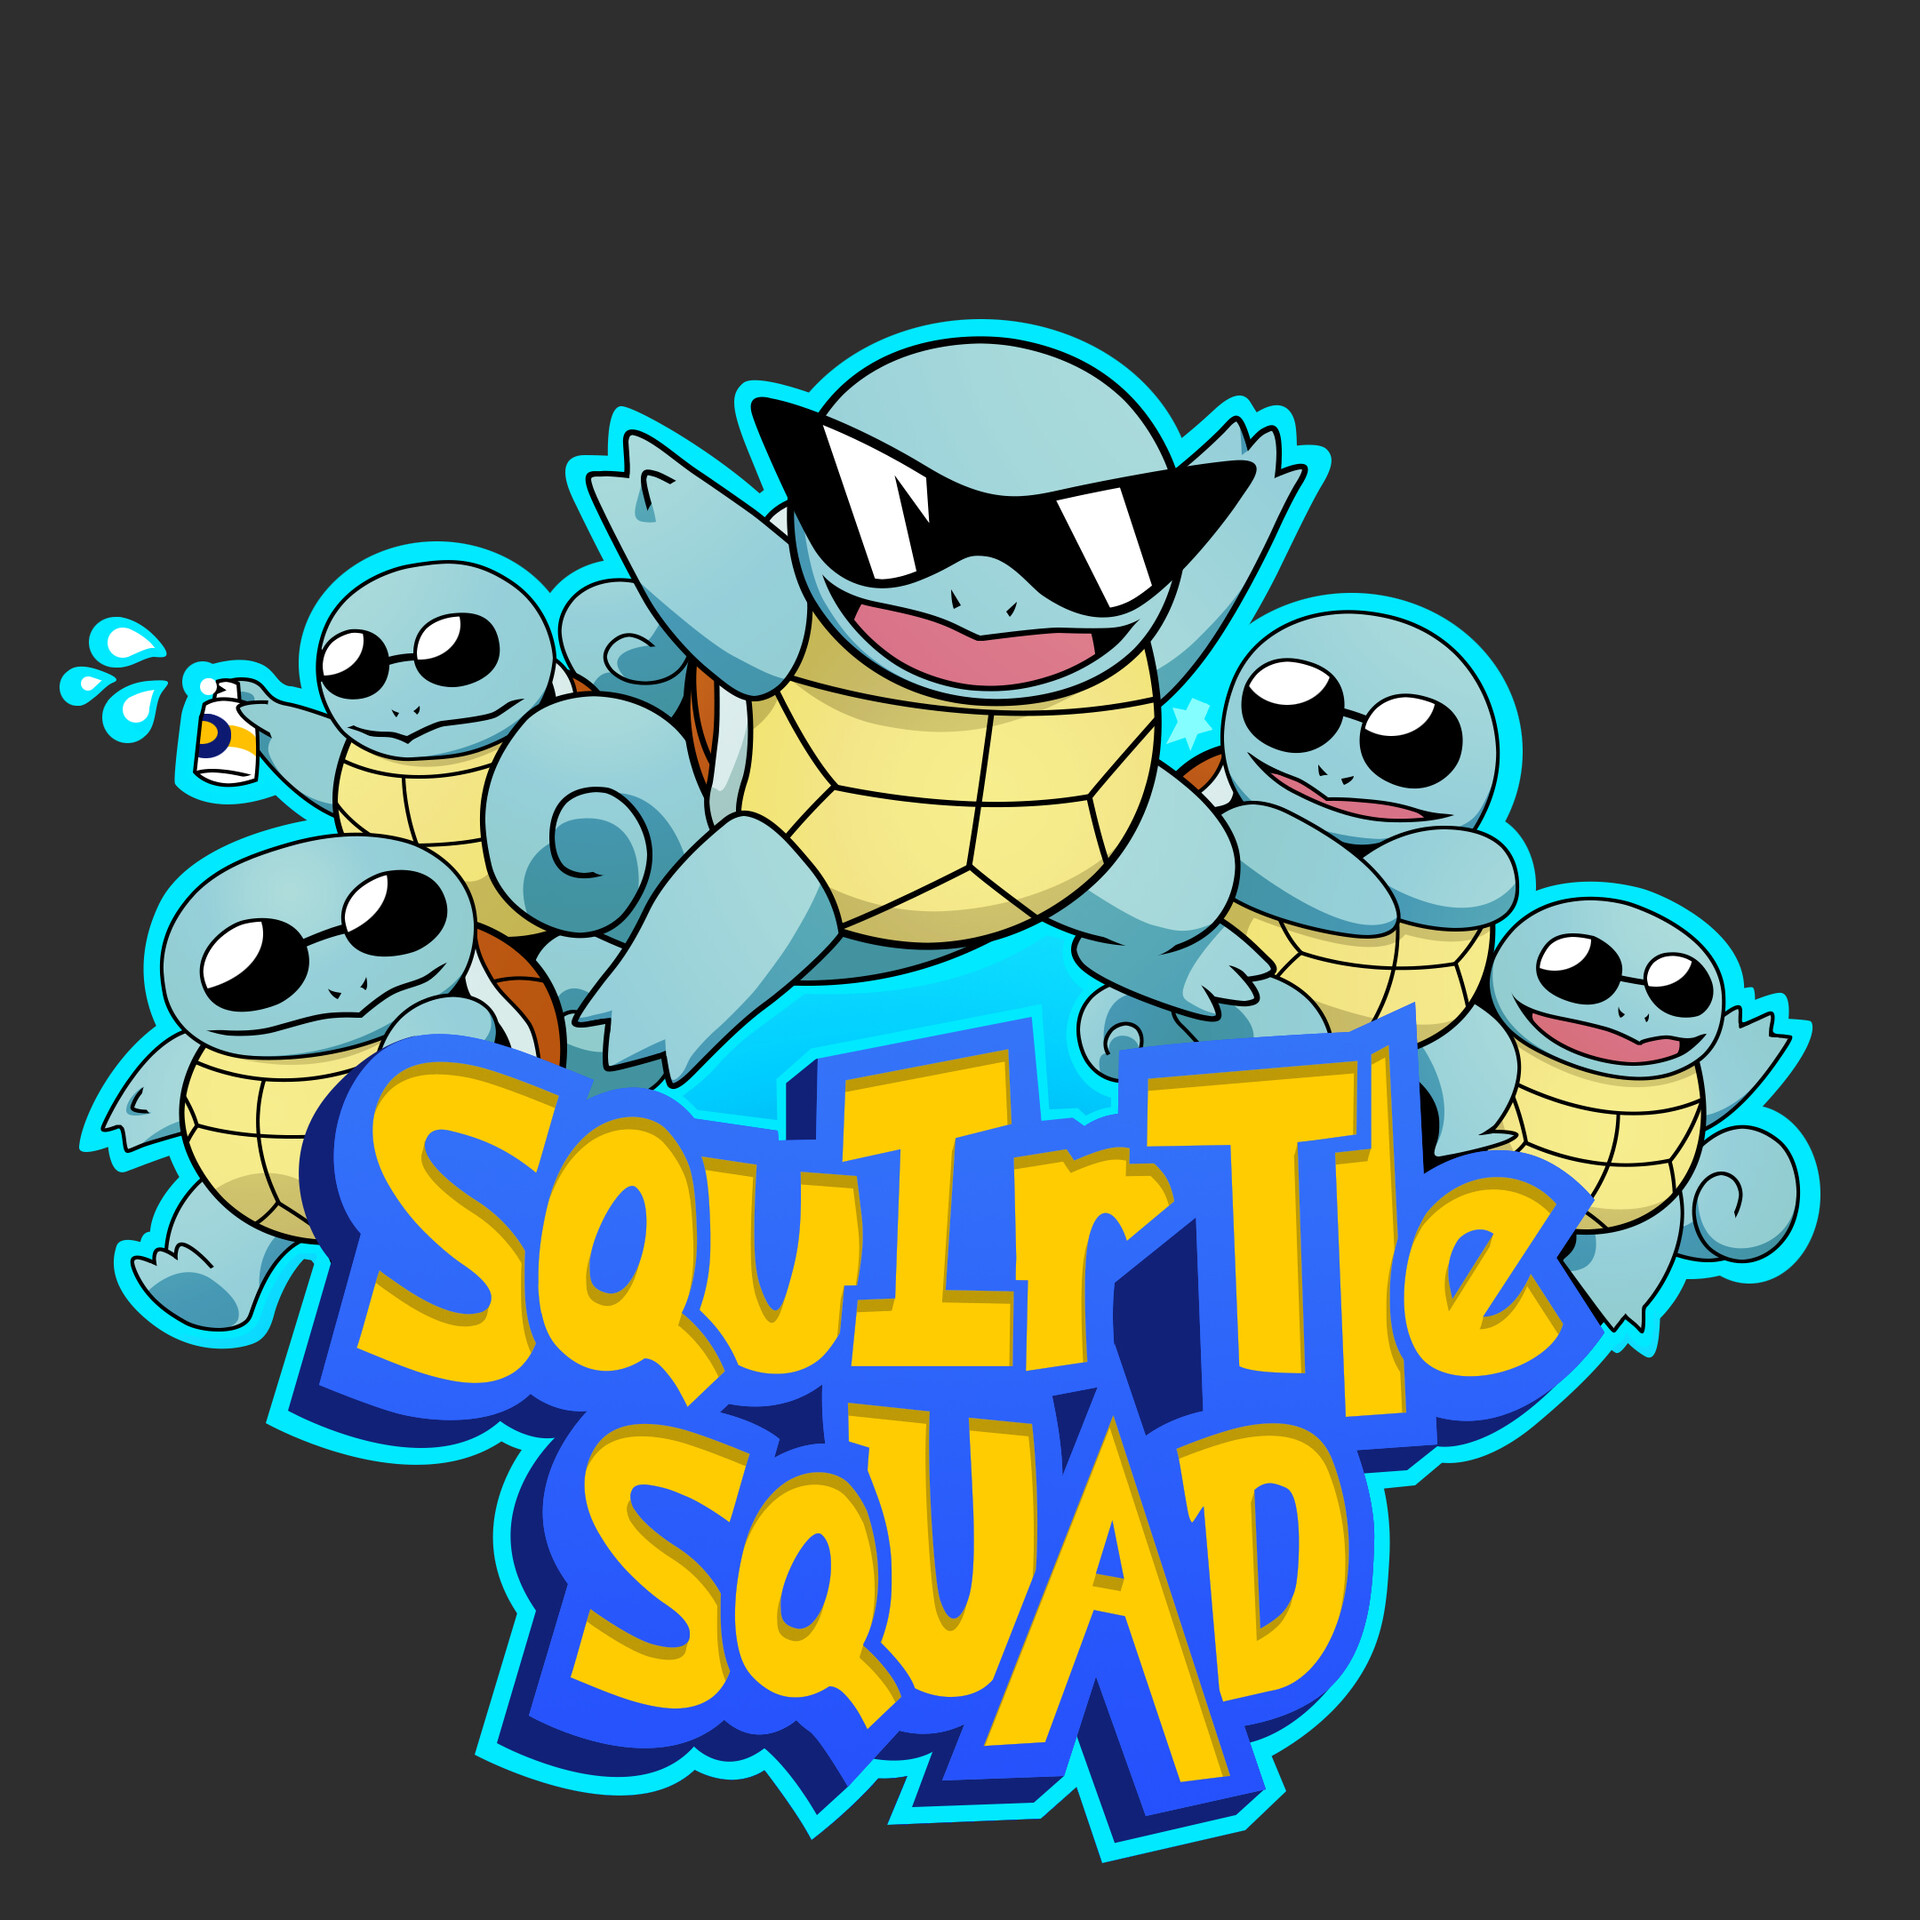 Aggregate 67+ squirtle squad wallpaper - in.cdgdbentre